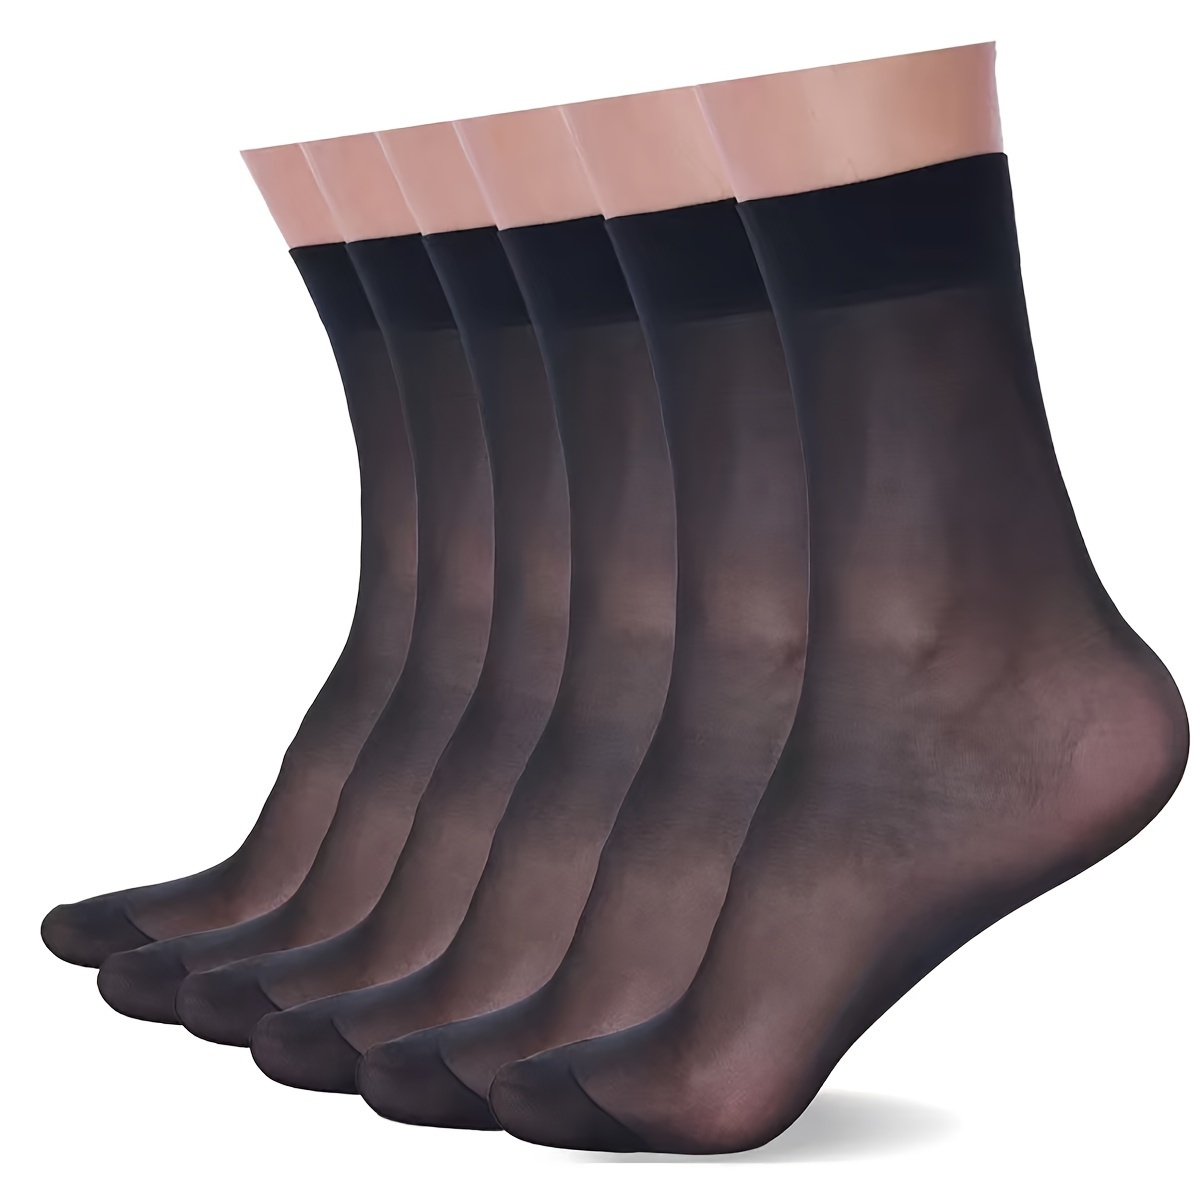 

6 Pairs Of Men's Calf See Though Sheers, Business Socks, Ultra-thin Dress Stockings